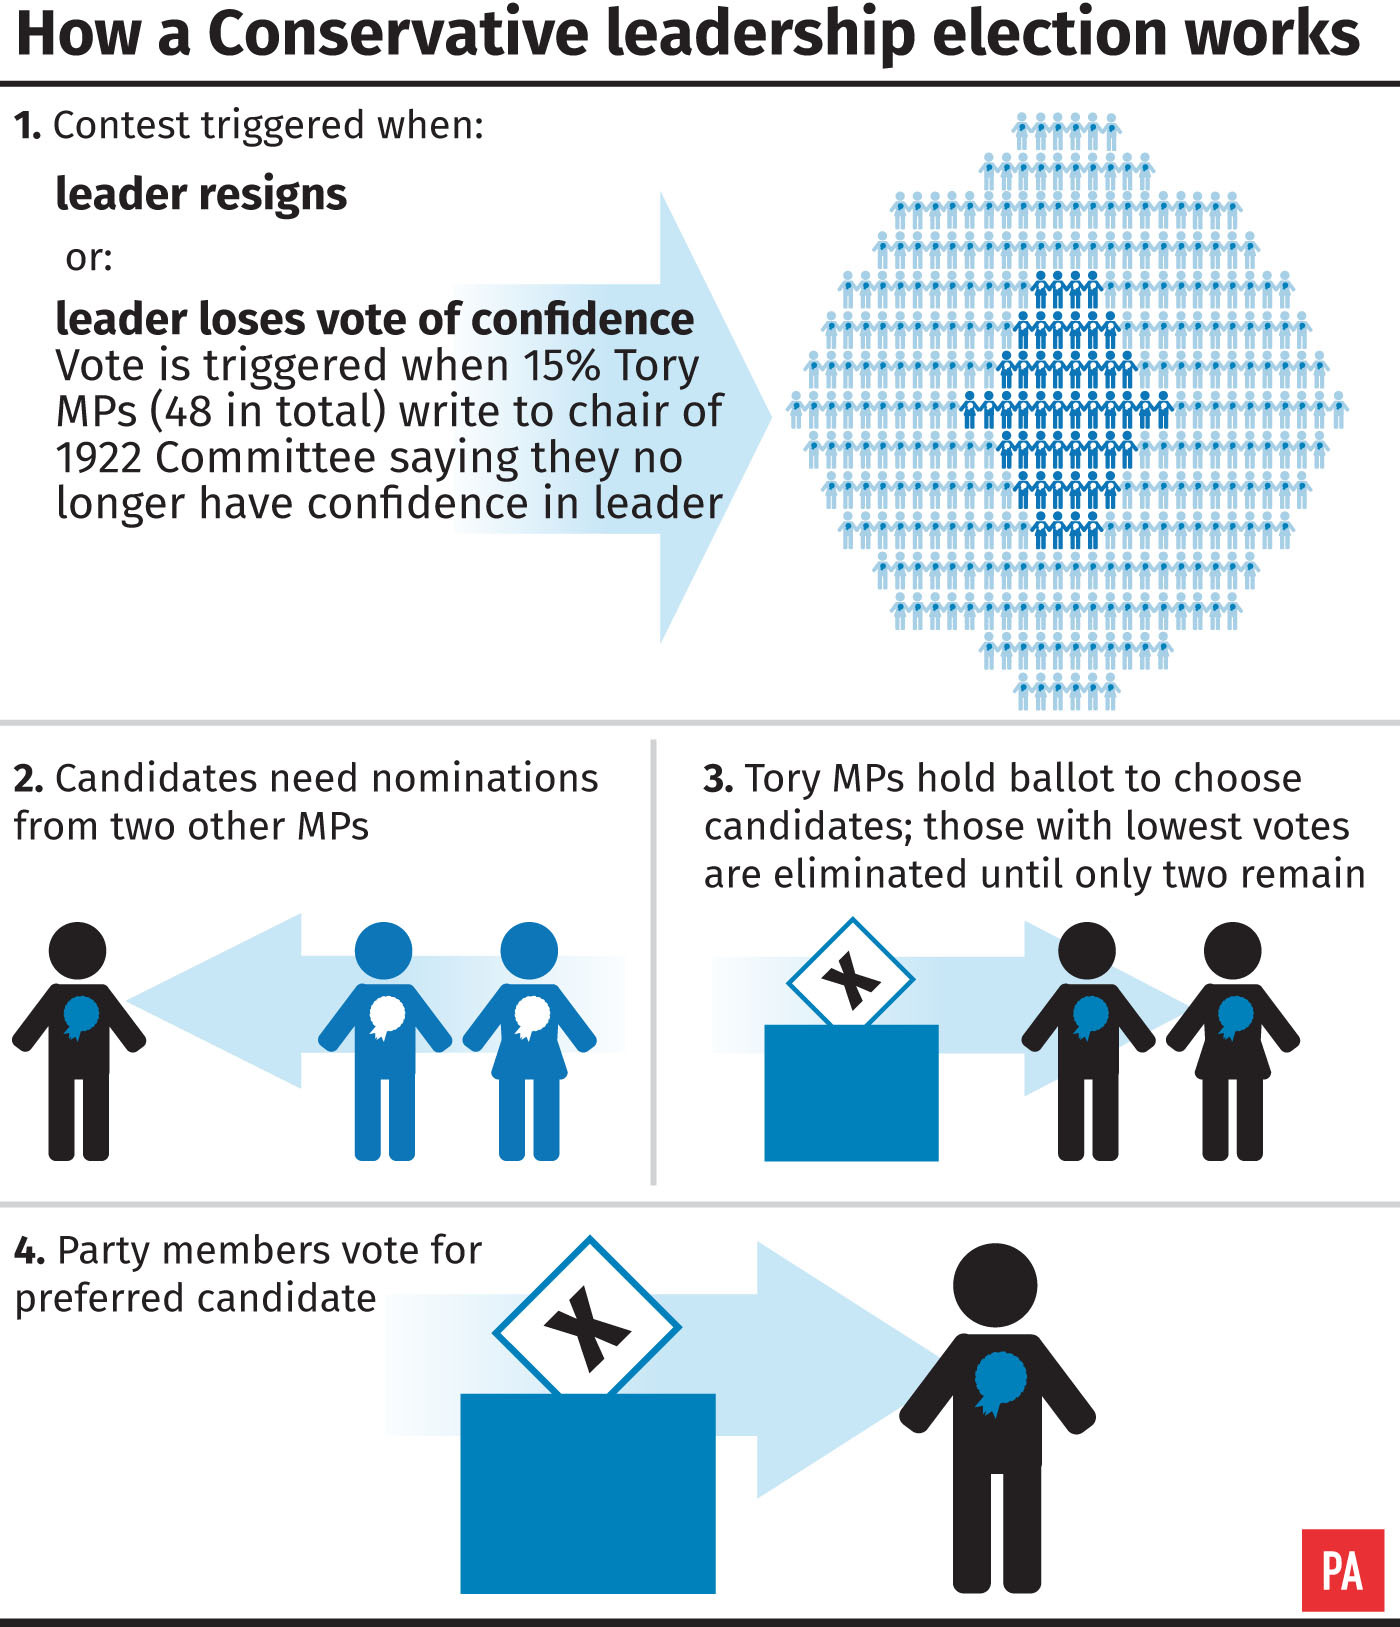 How a Conservative leadership election works